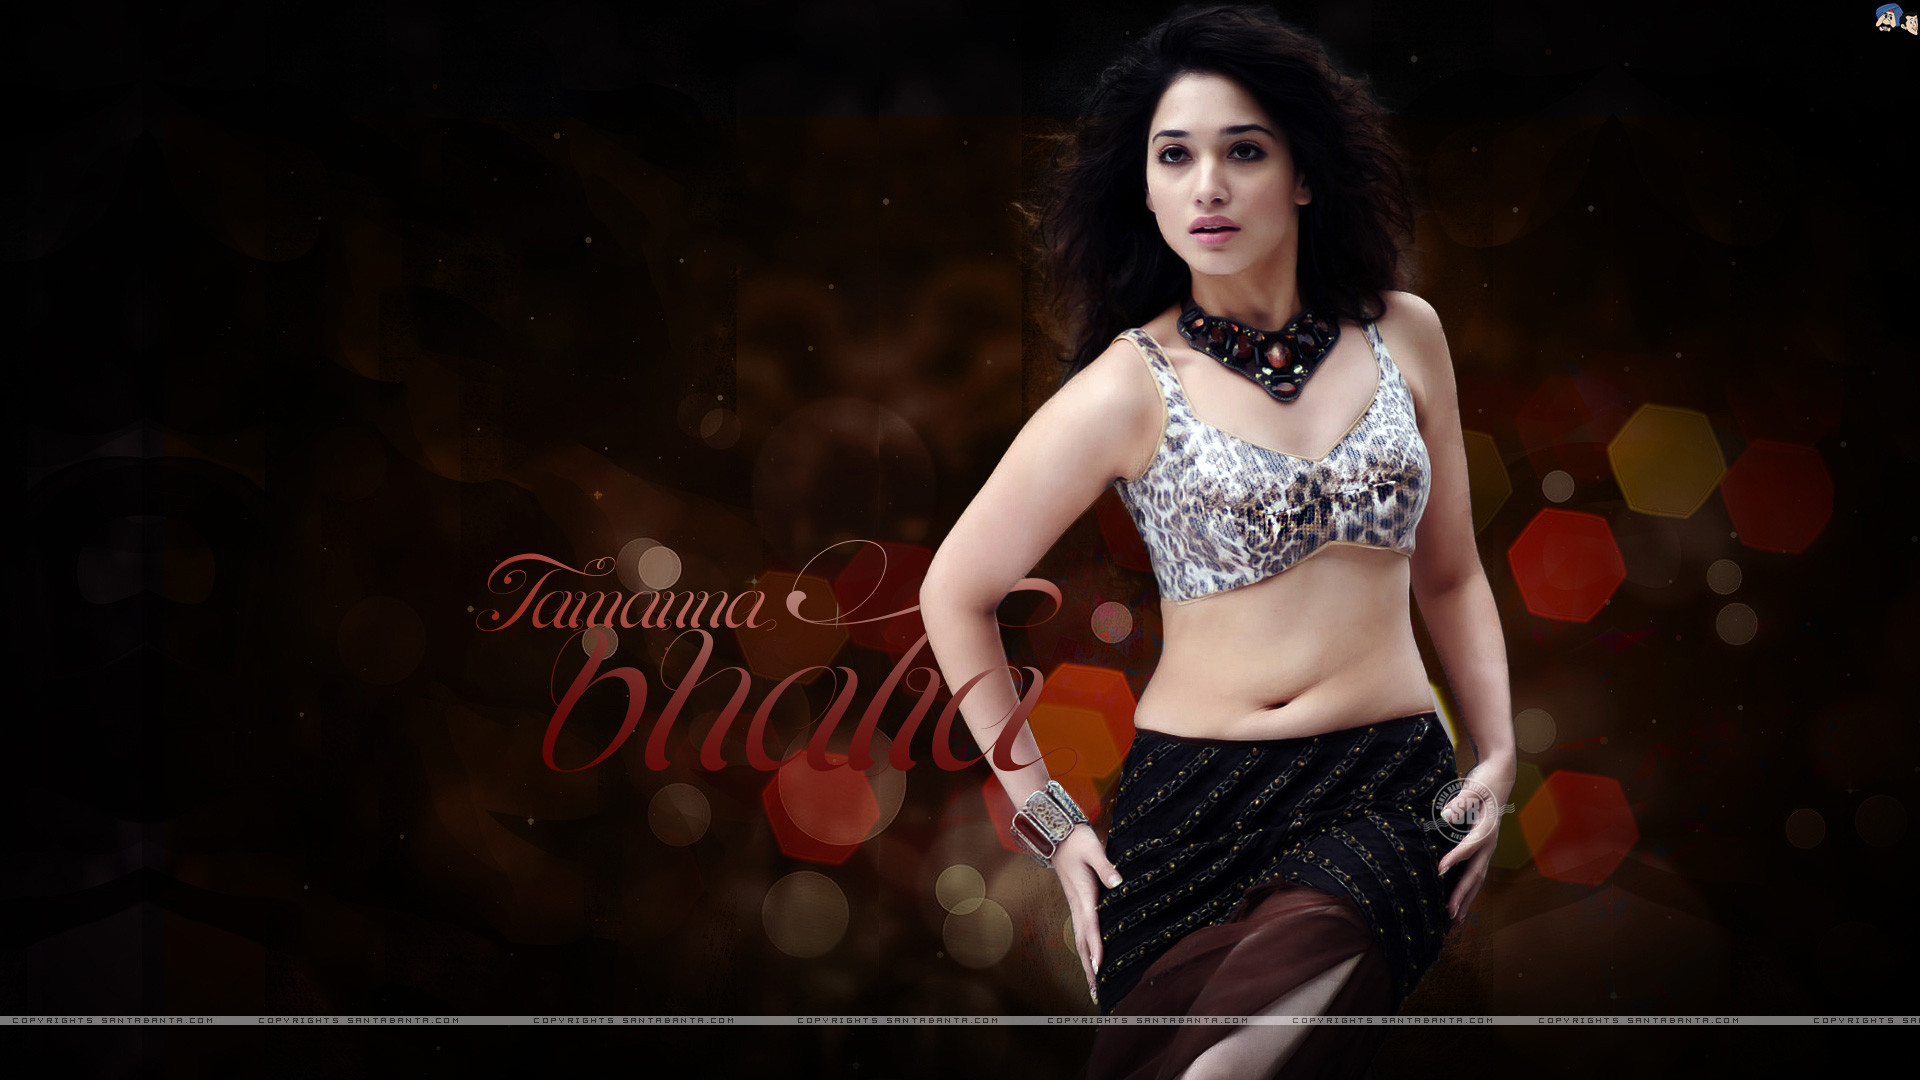 1920x1080 Indian Celebrities(F) Tamanna Bhatia Wallpaper Wallpapers Also available in  screen resolutions.